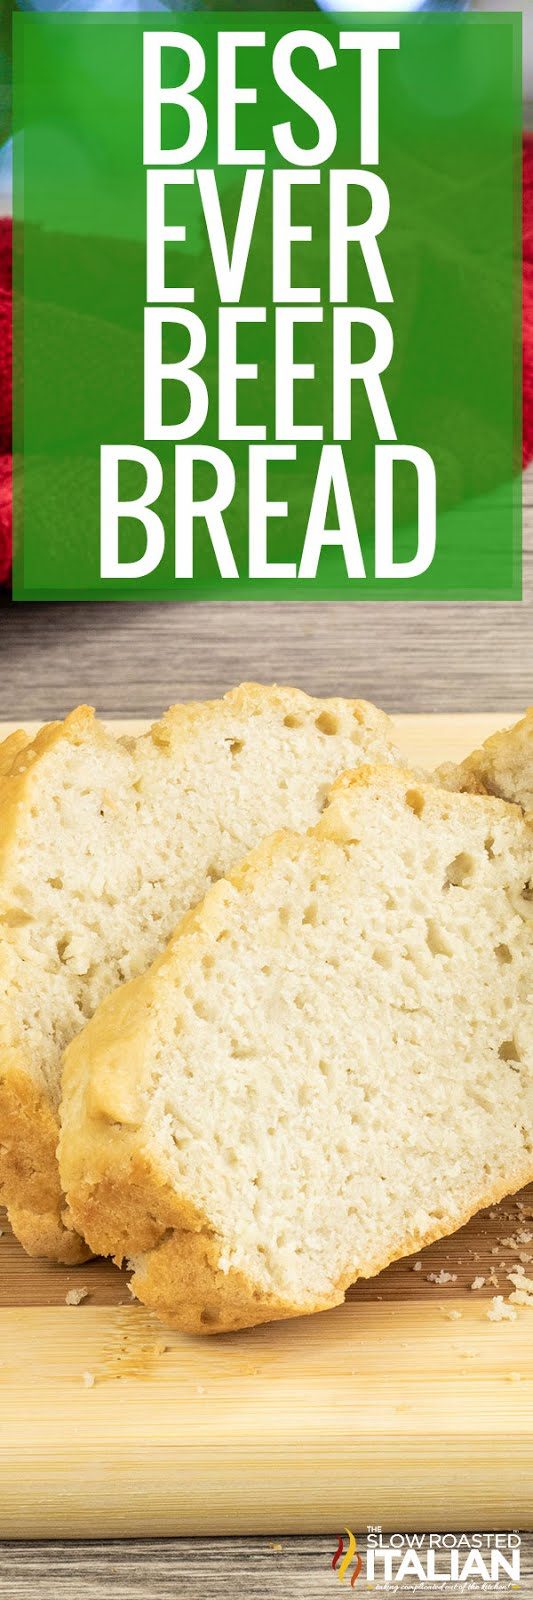 titled pinterest collage for beer bread recipe